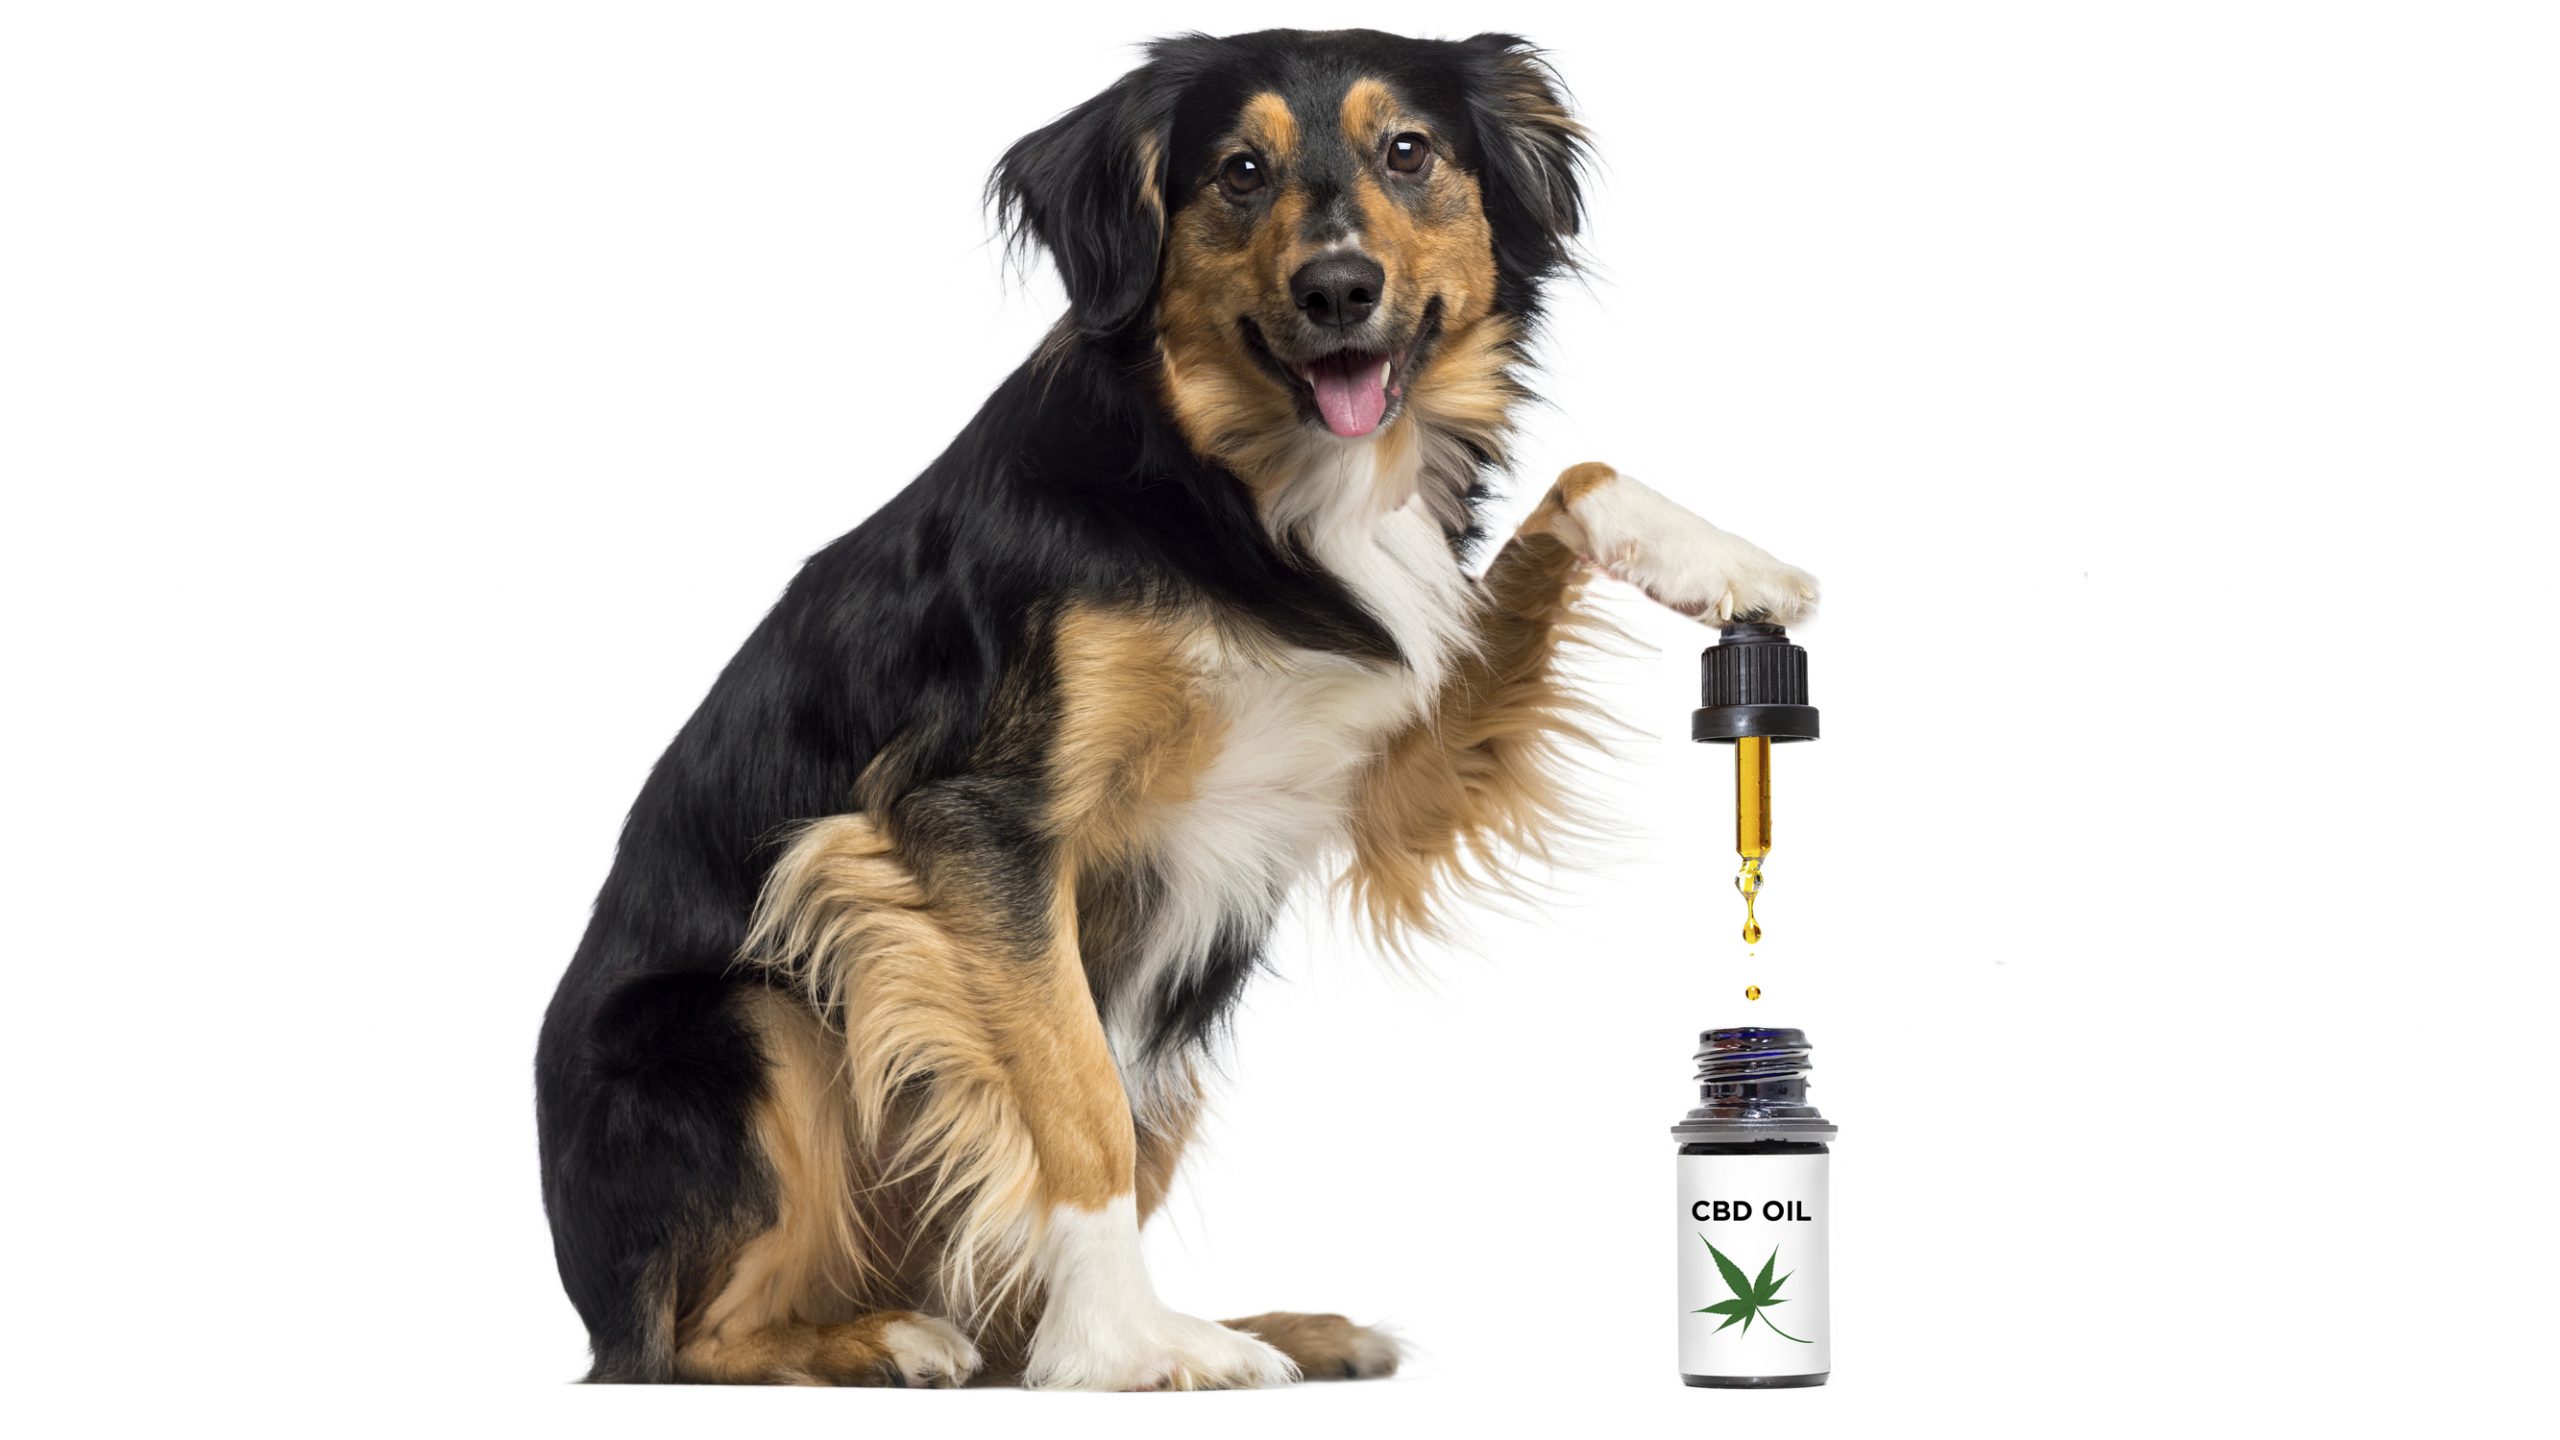 What Is The Purpose Of Using CBD Oil On Pets?